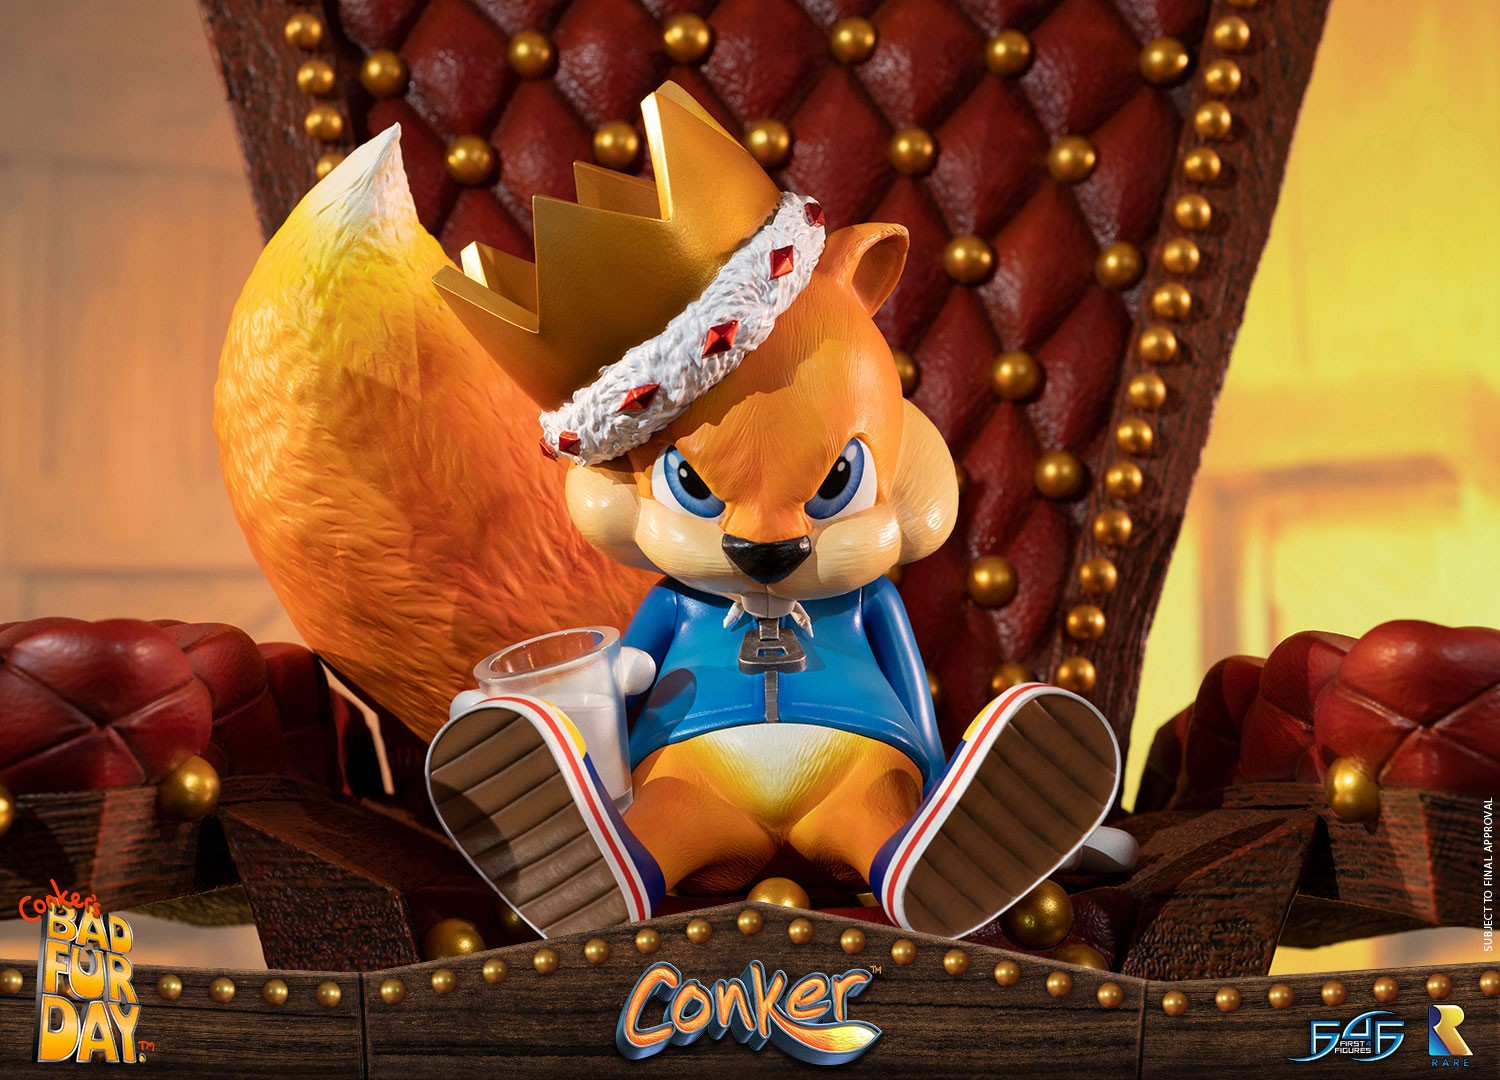 conker's bad fur day wallpaper,cartoon,fictional character,animated cartoon,adventure game,animation